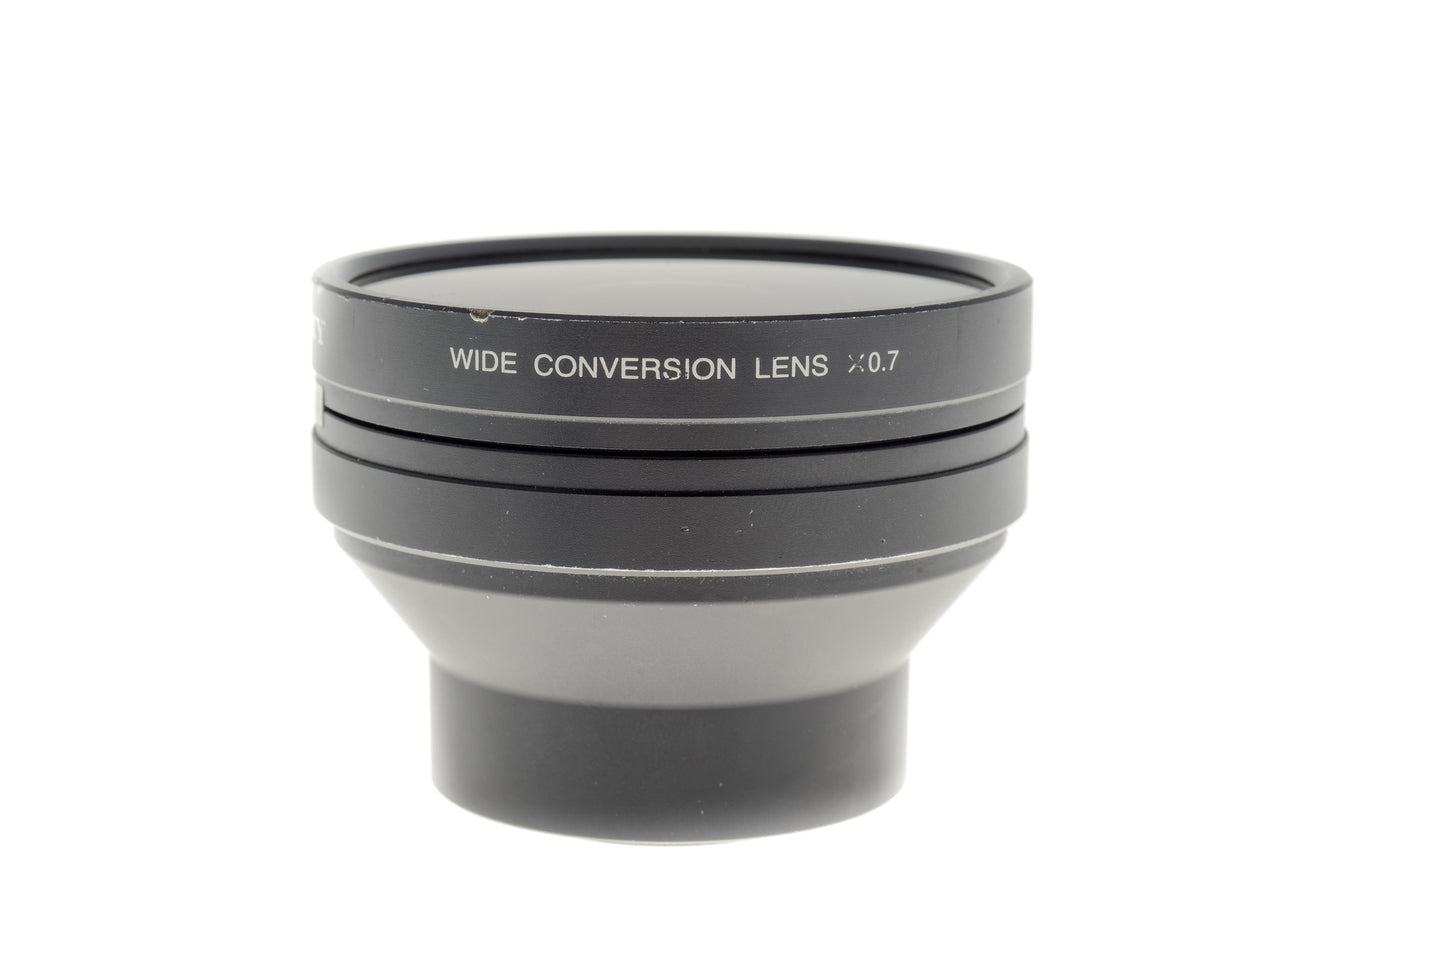 Sony 0.7x Wide Converter VCL-HG0737Y - Lens